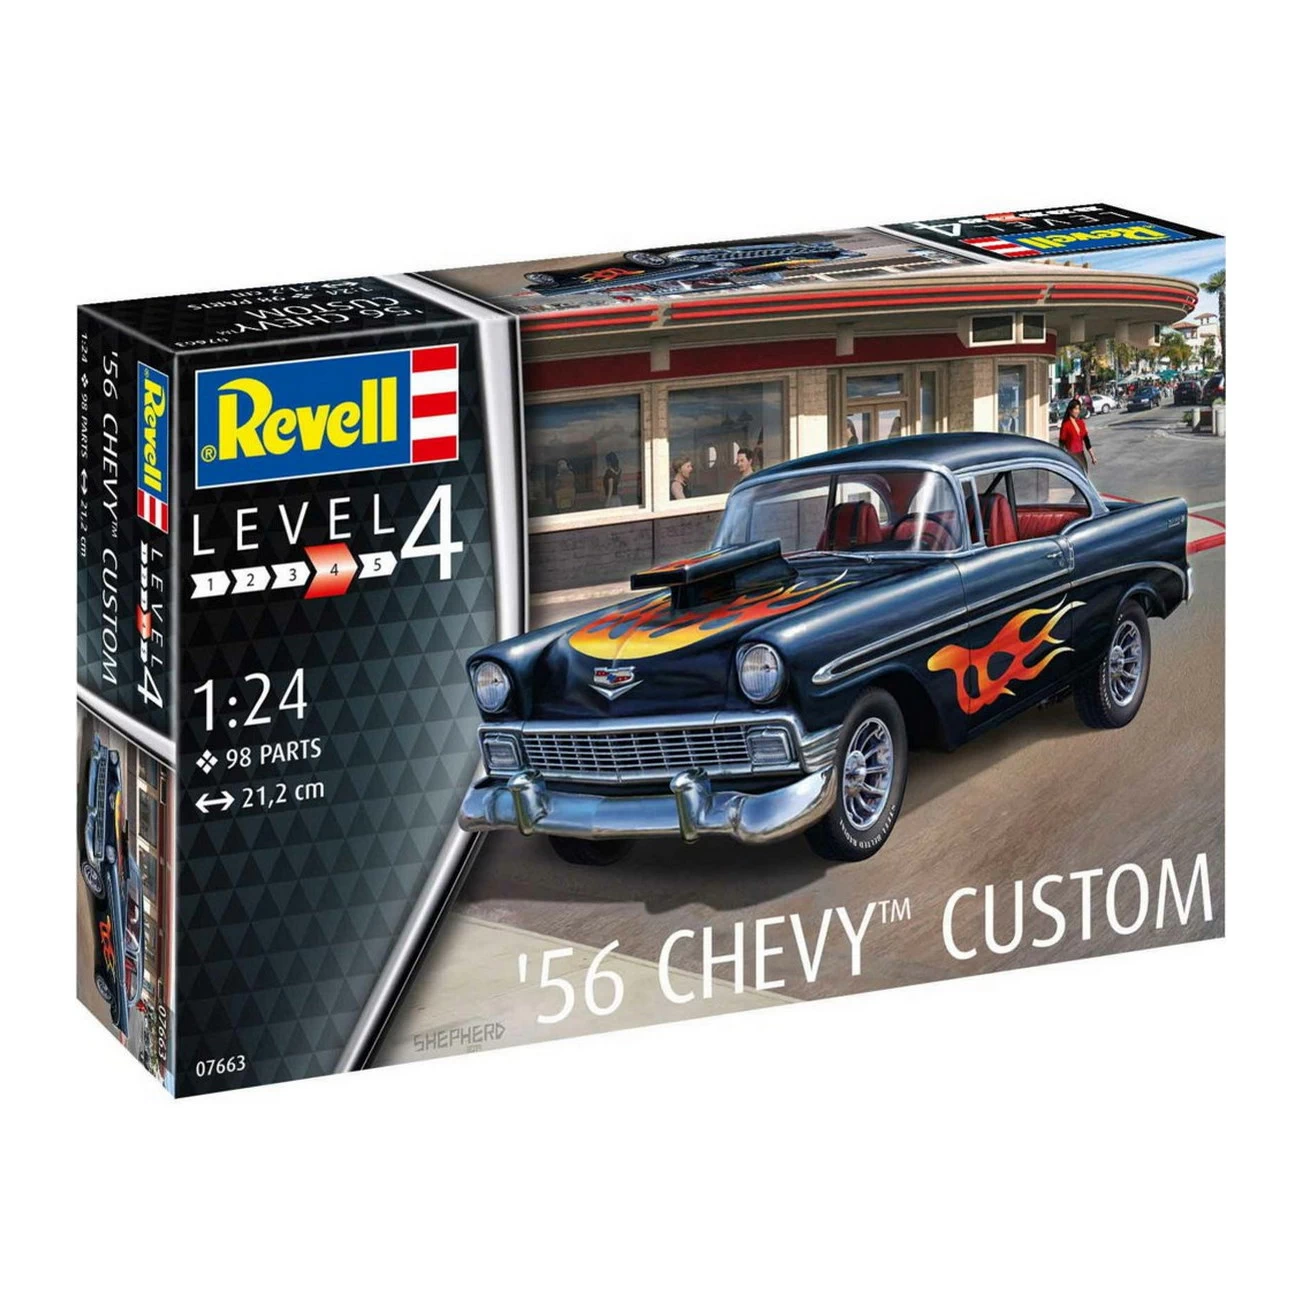 Revell 07663 - 1956 Chevy Customs  - Auto Modell